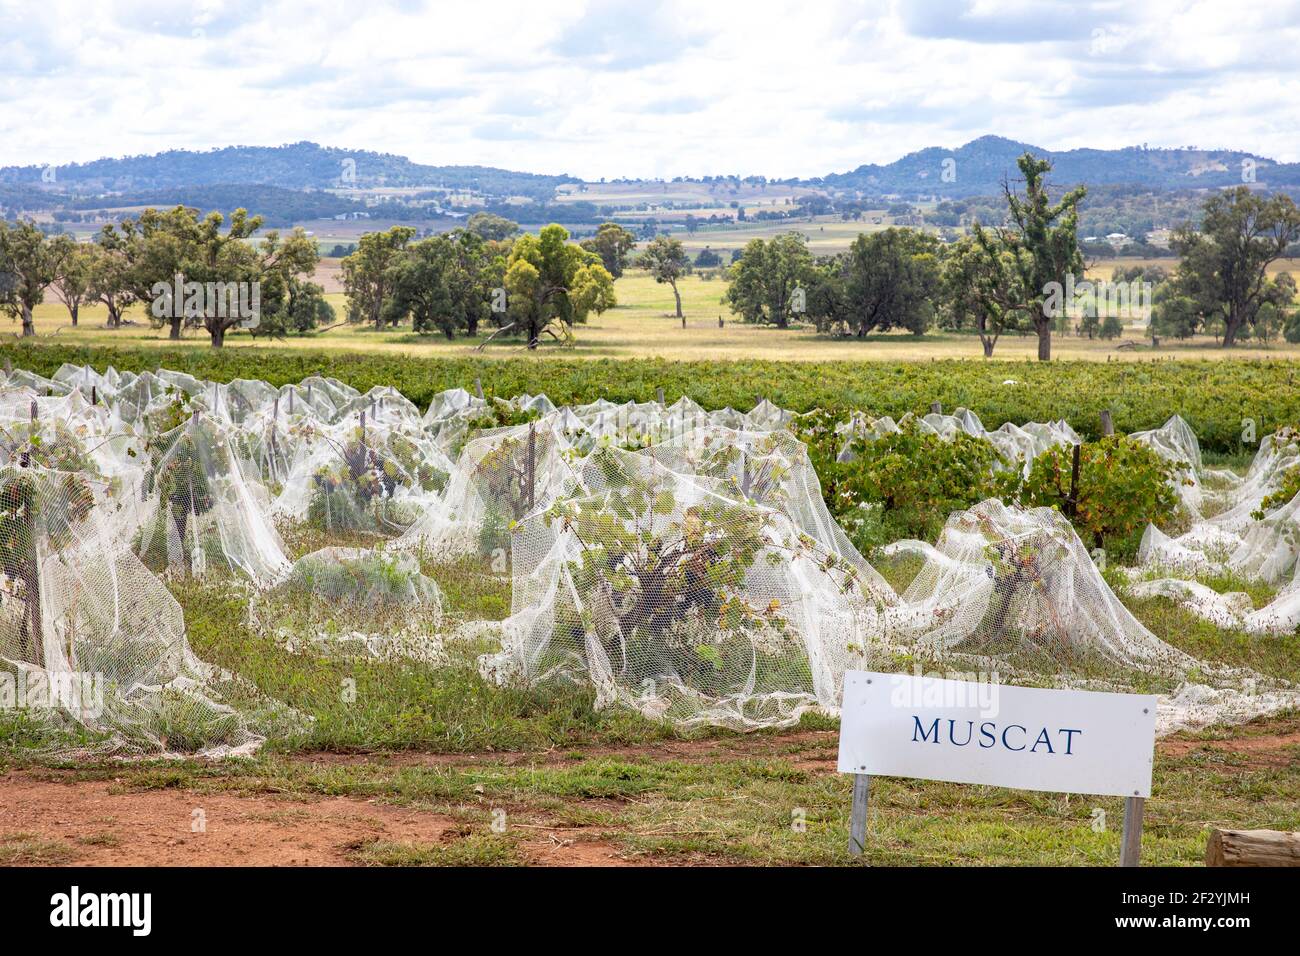 Muscat grape vines growing under netting at a winery in Mudgee,regional new south wales,Australia Stock Photo